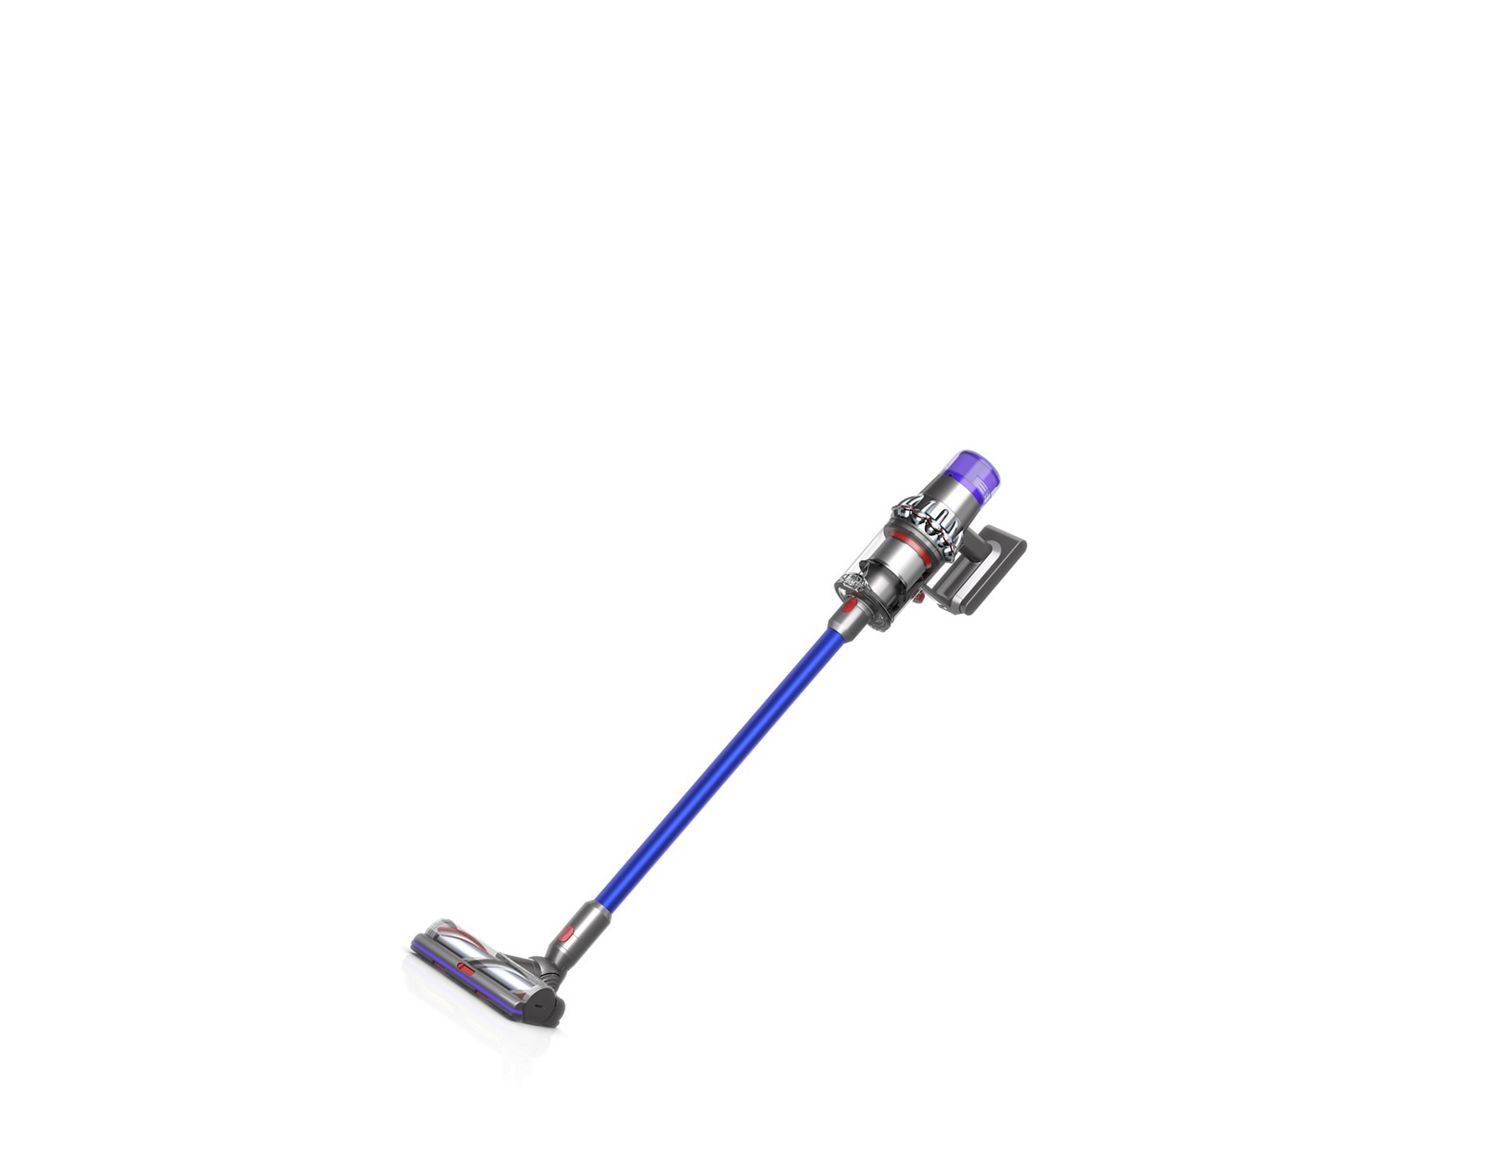 Help and support for your Dyson V11™ vacuum – Dyson